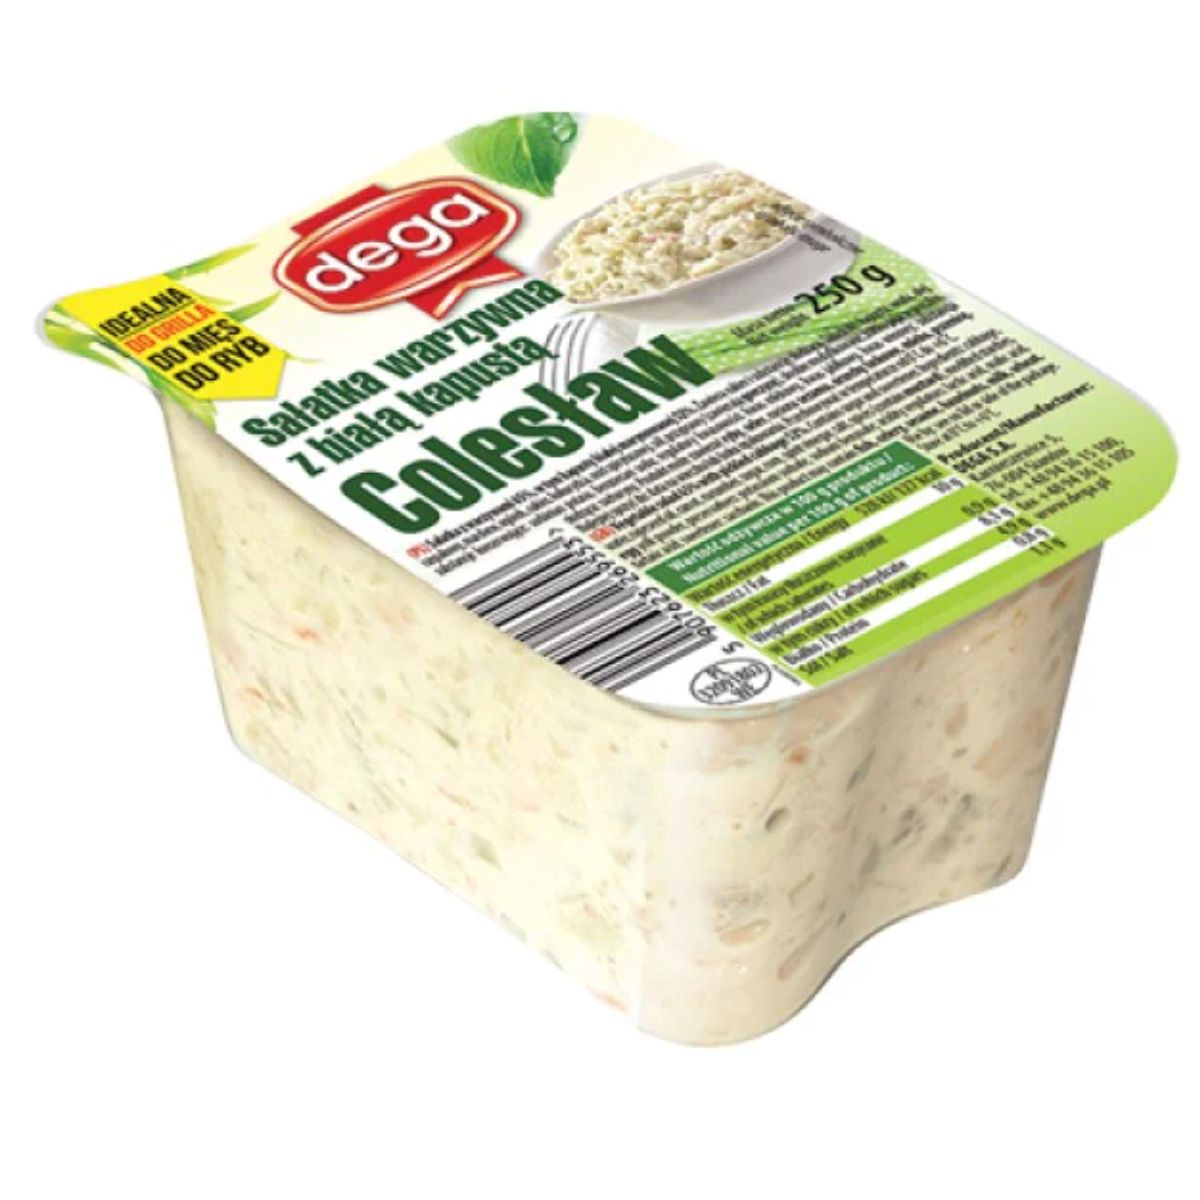 A package of Dega - Coleslaw - 250g on a white background.